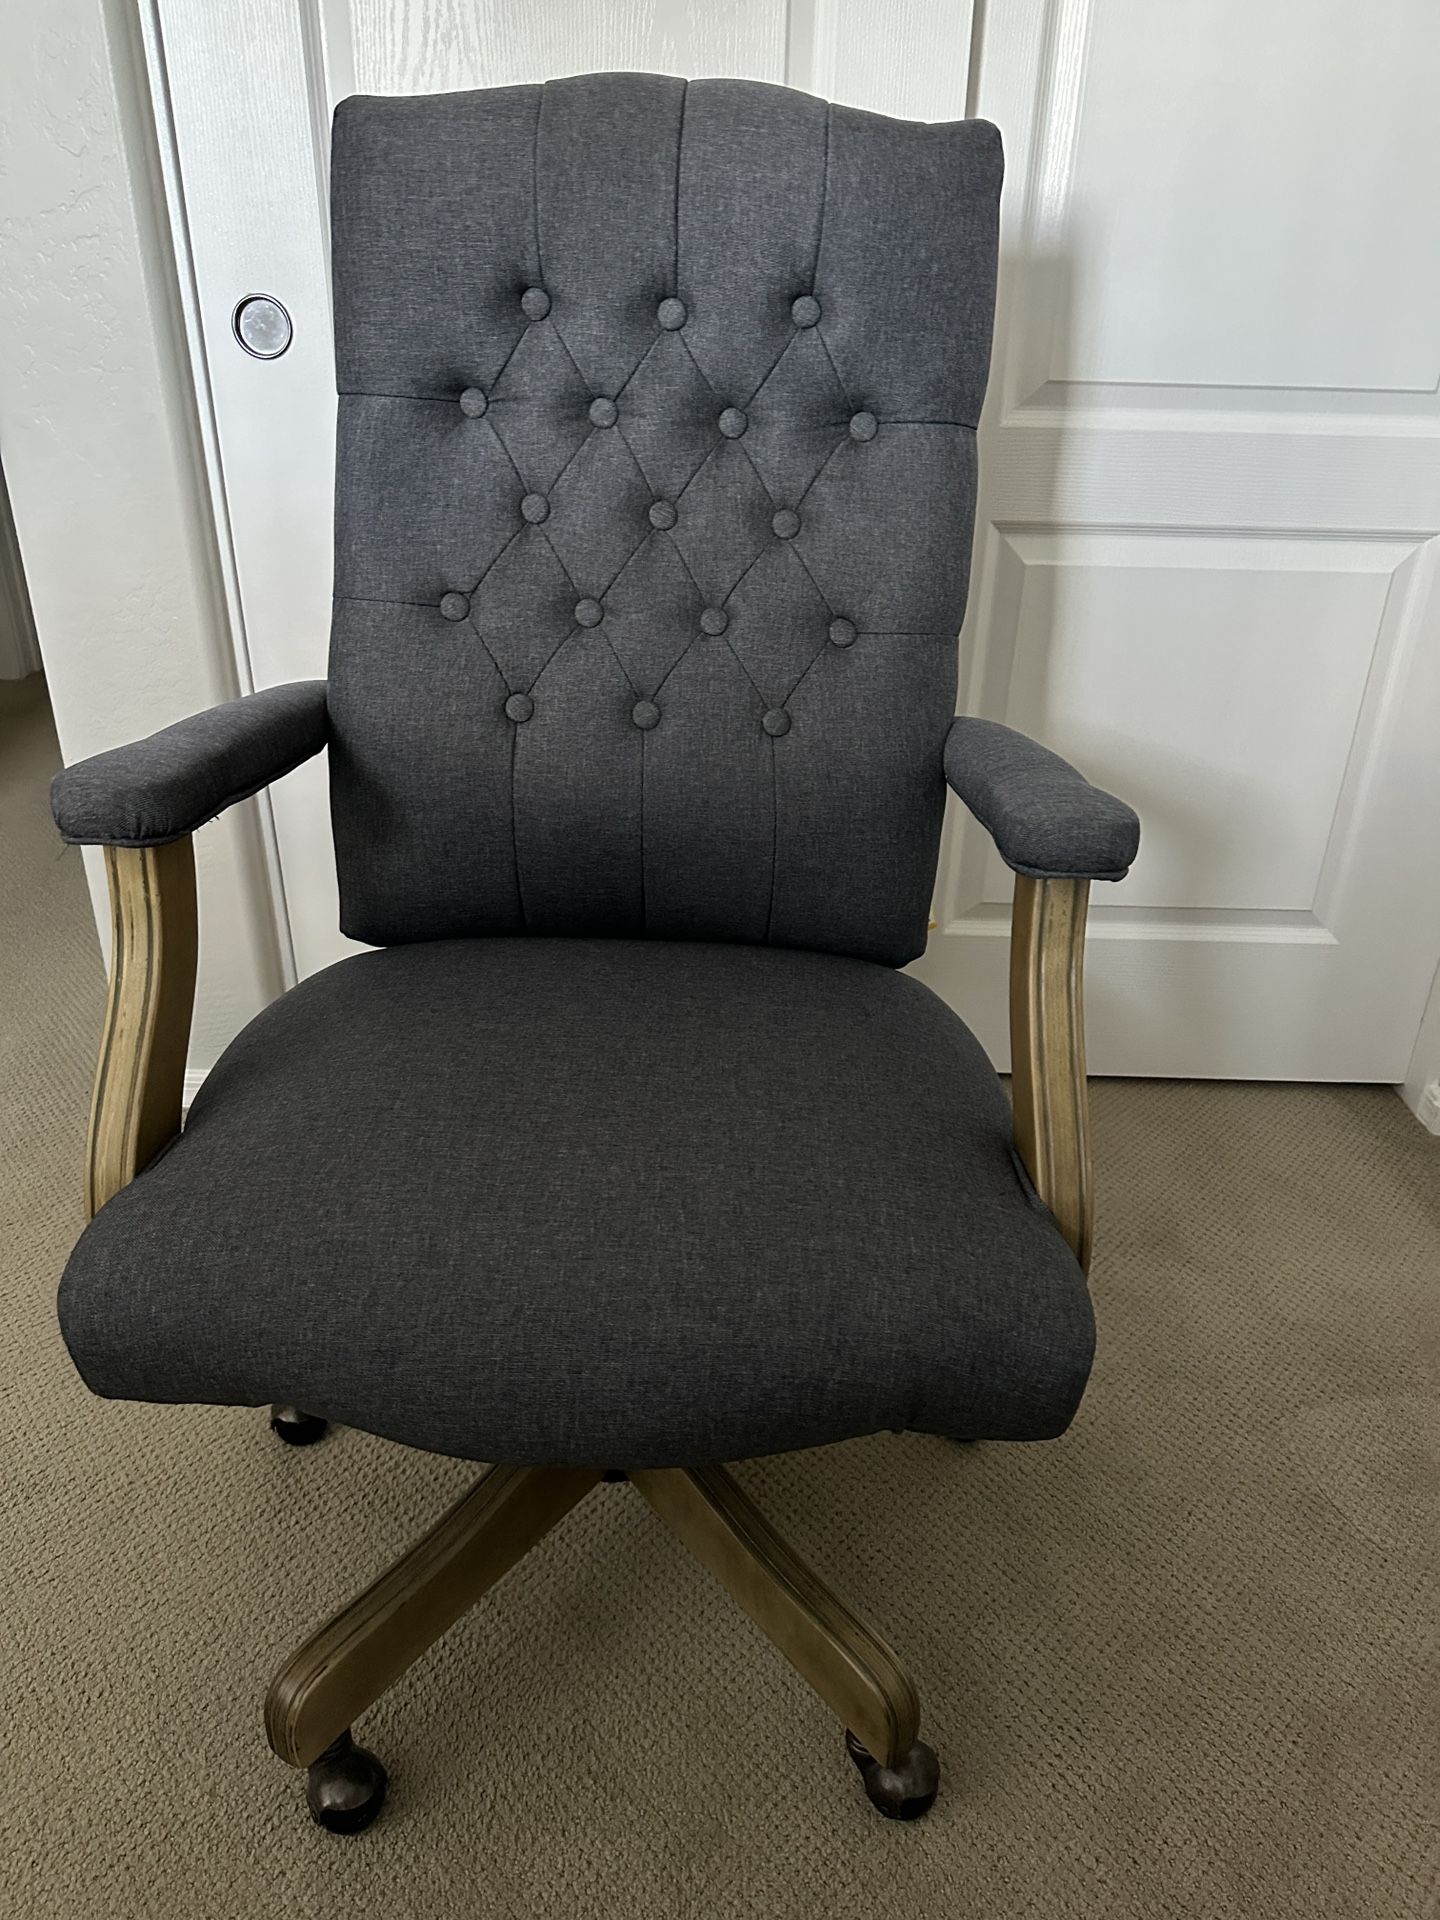 Traditional Executive Chair - Boss Office Products